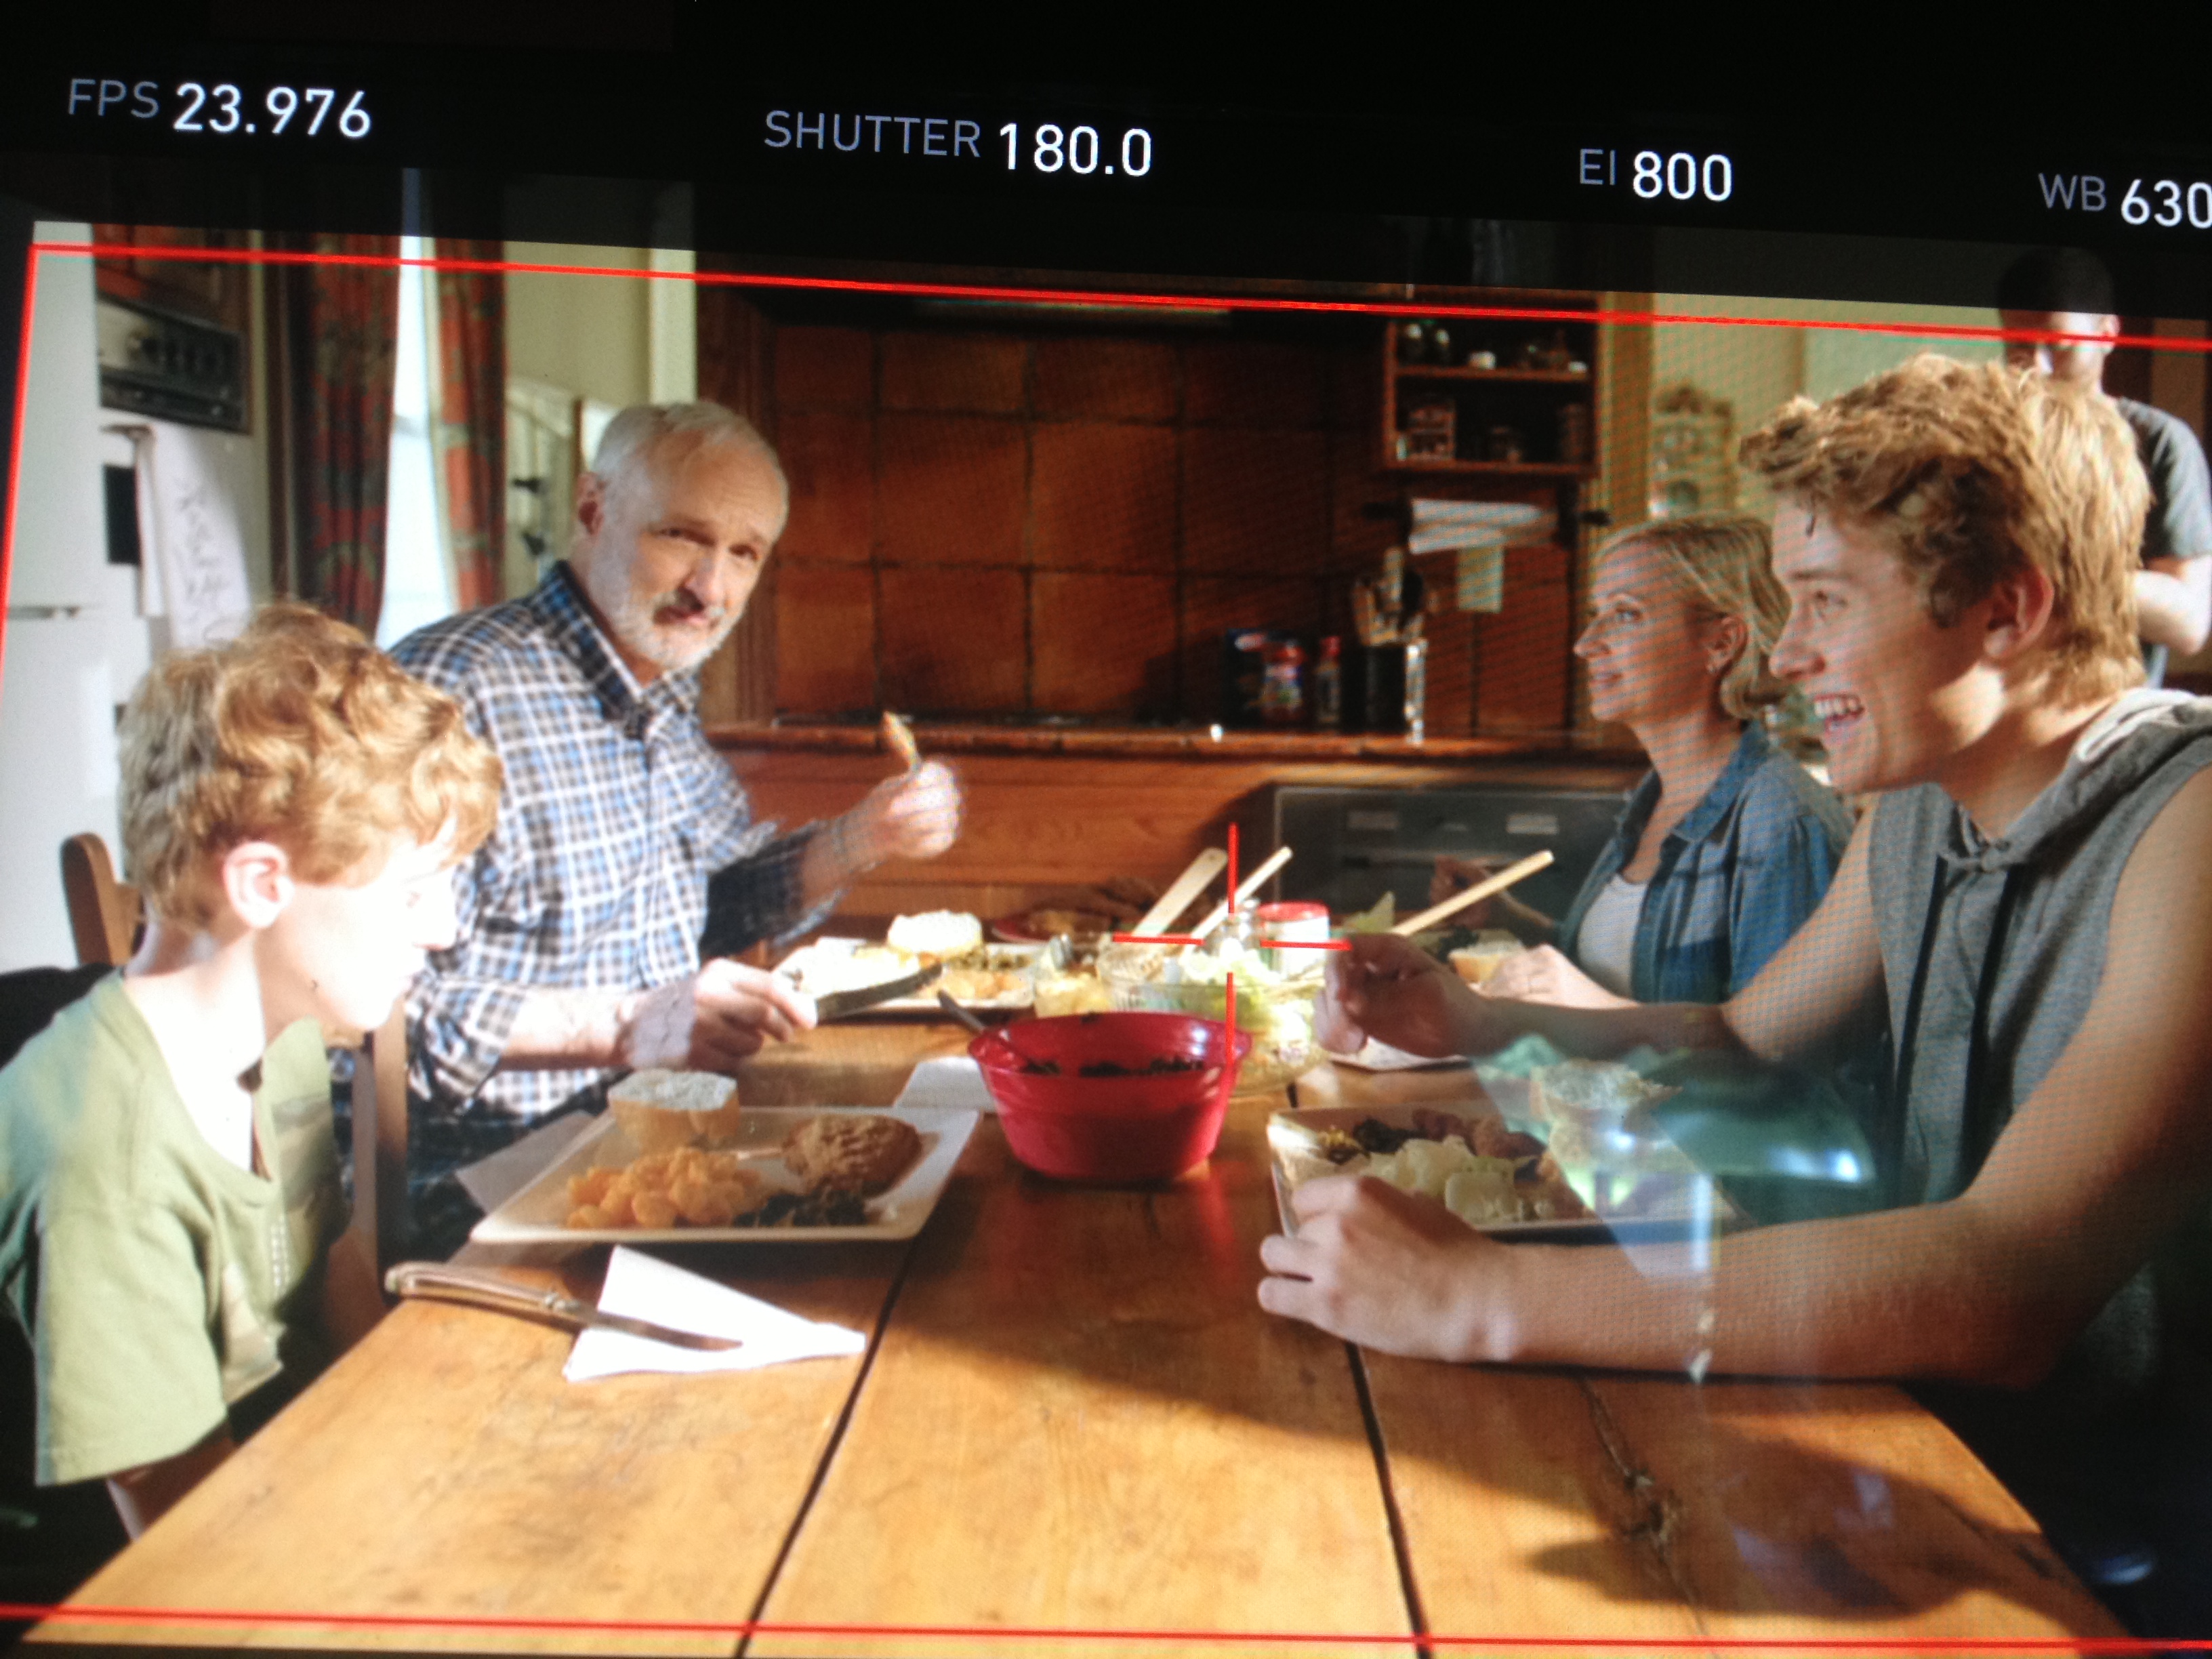 Shooting Camp Cool Kids with Connor Rosen, Michael Gross and Leigh-Allyn Baker